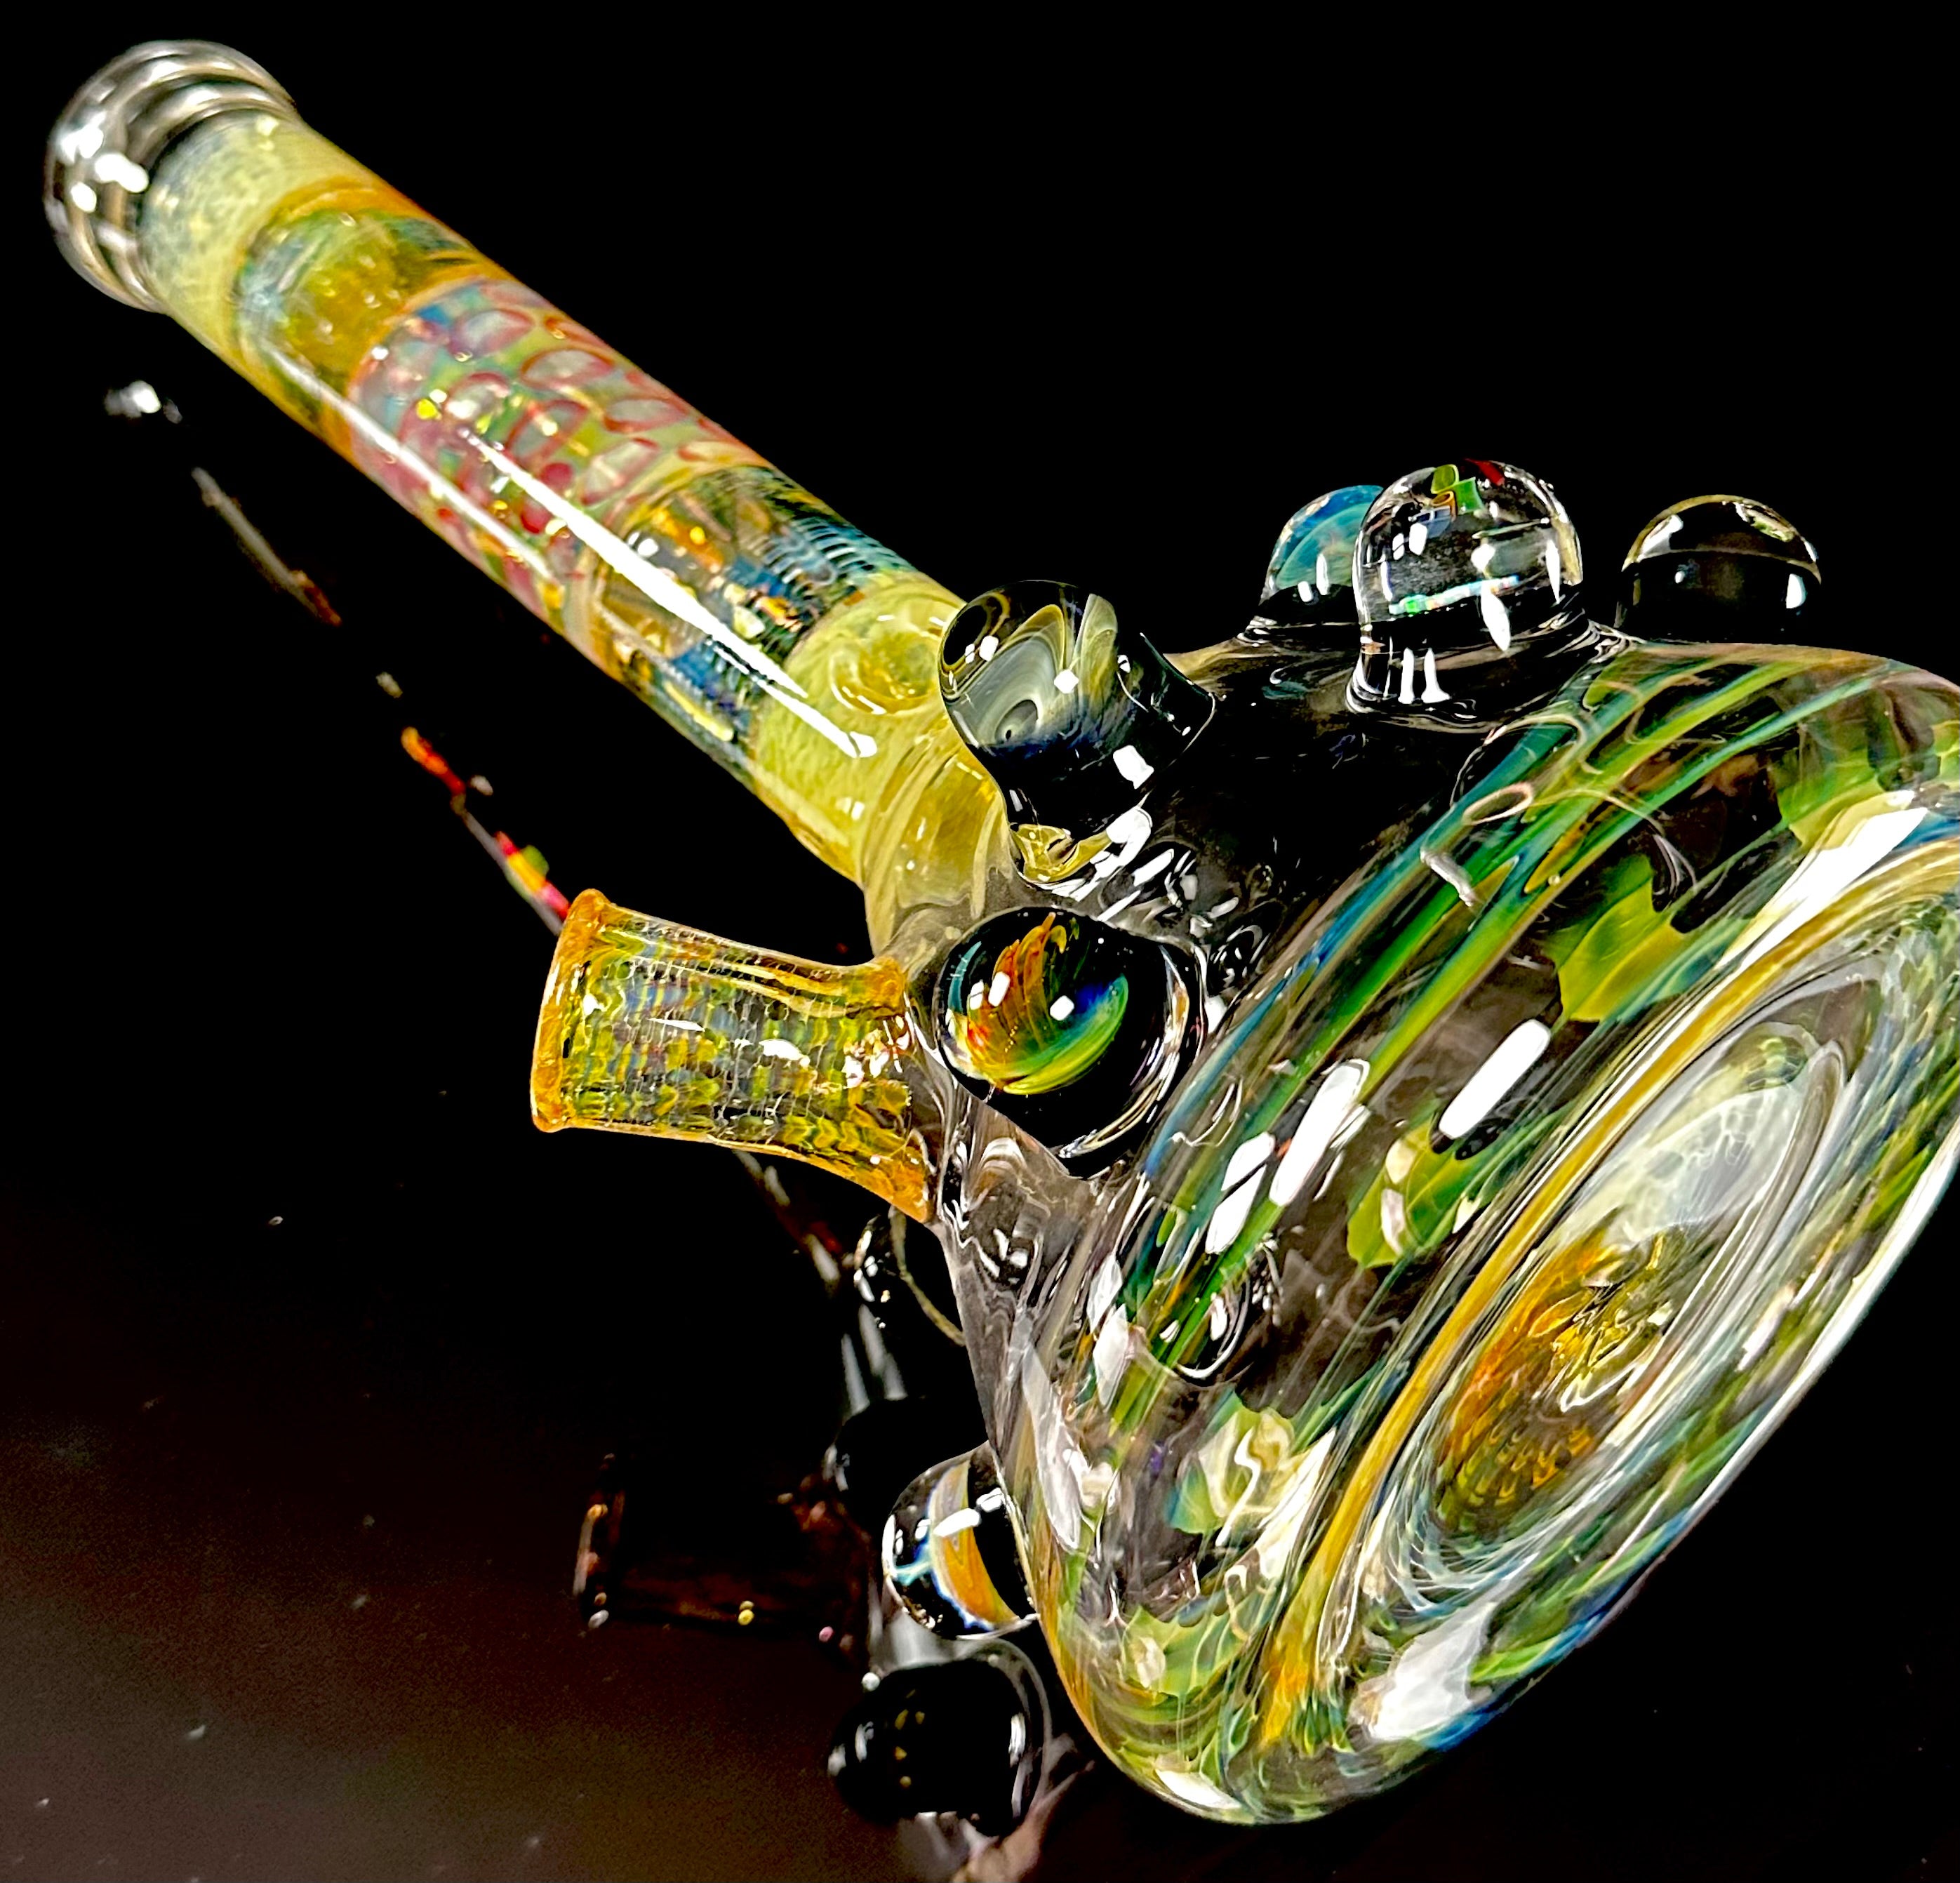 Hops x B $ Collab Beaker - Fumed with Worked Marbles